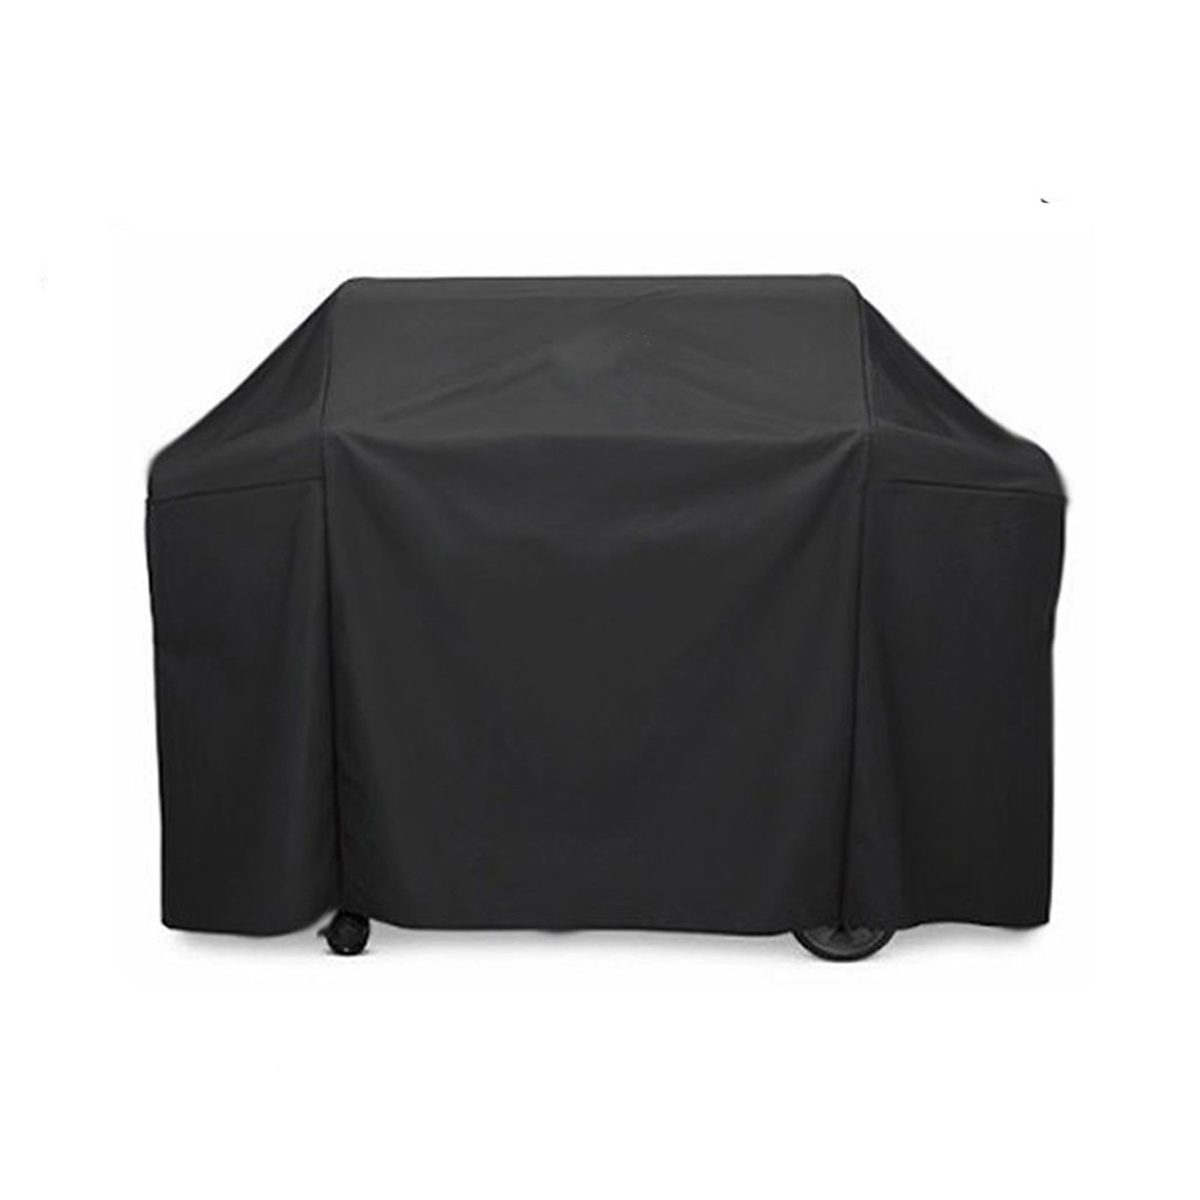 

Outdoor Barbeque BBQ Grill Waterproof Cover With Storage Bag For Weber 7131 Genesis II